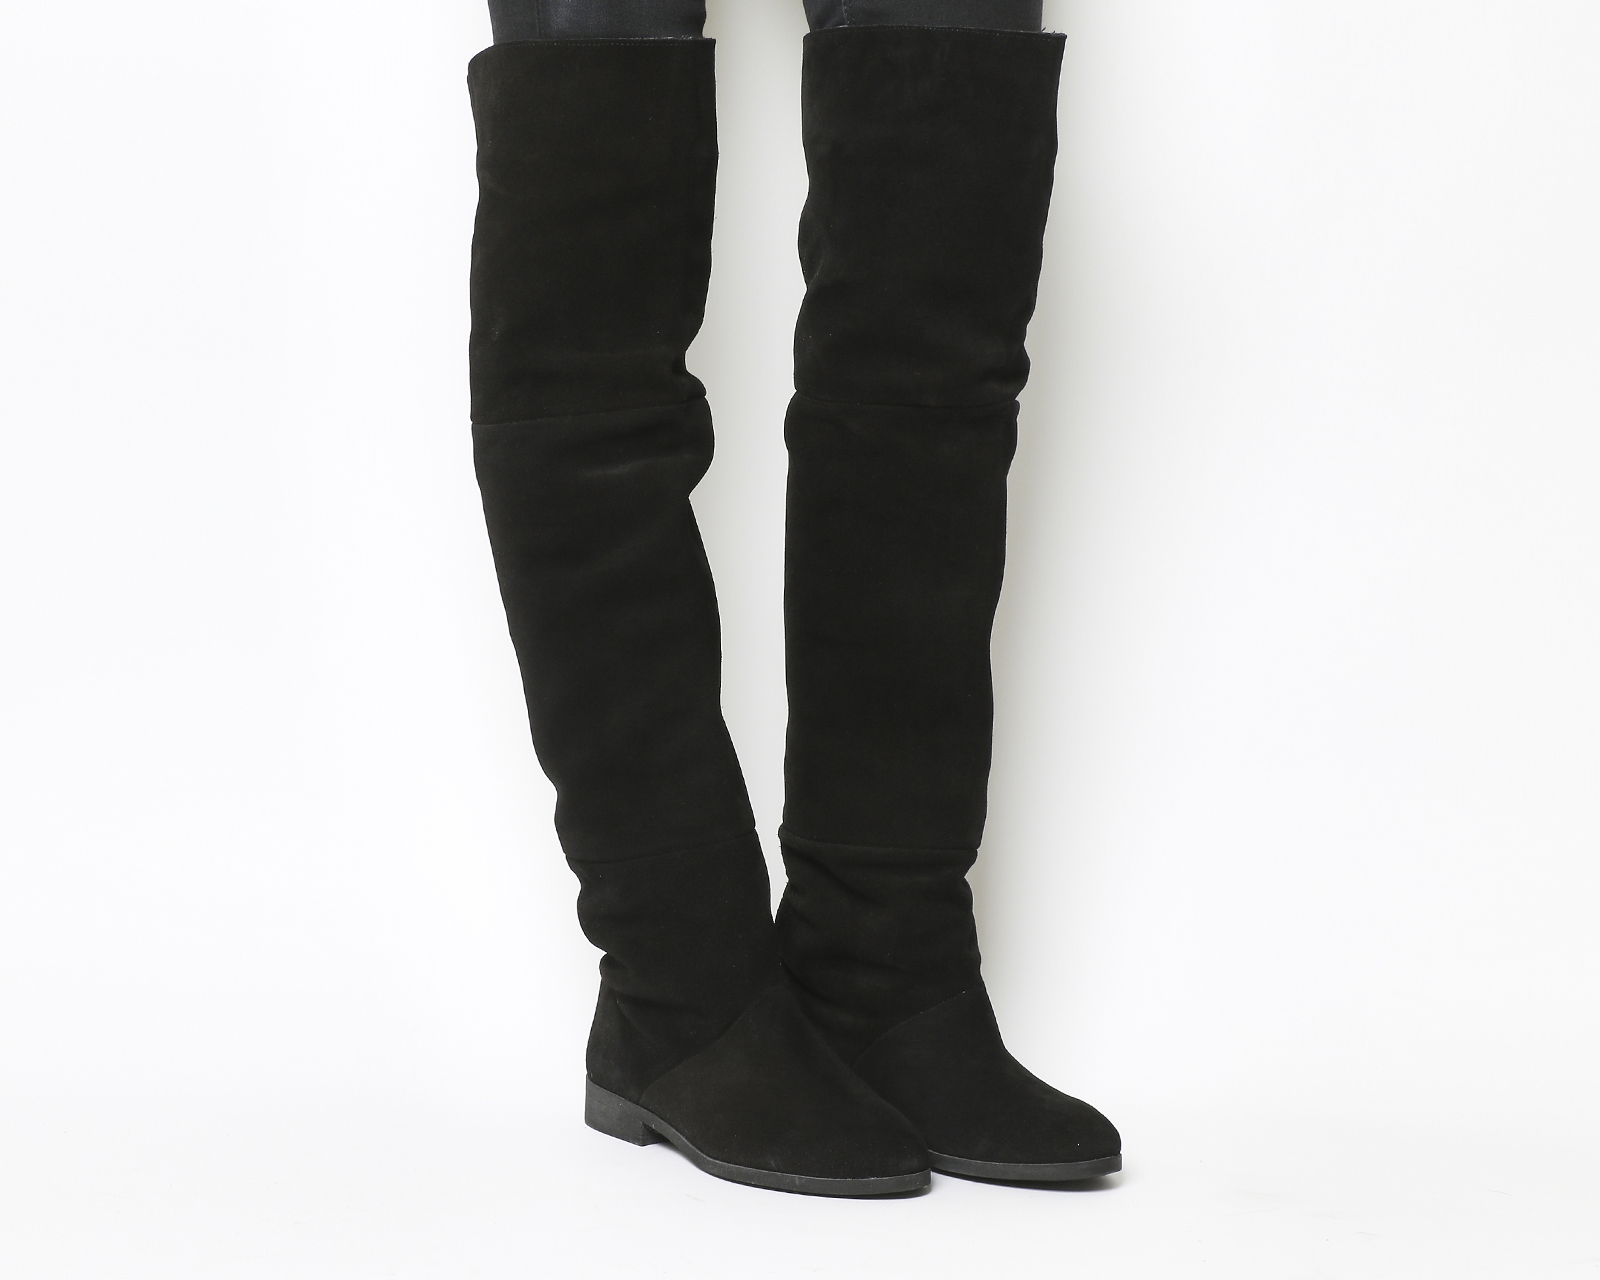 OFFICEEmbrace Over The Knee BootsBlack Suede